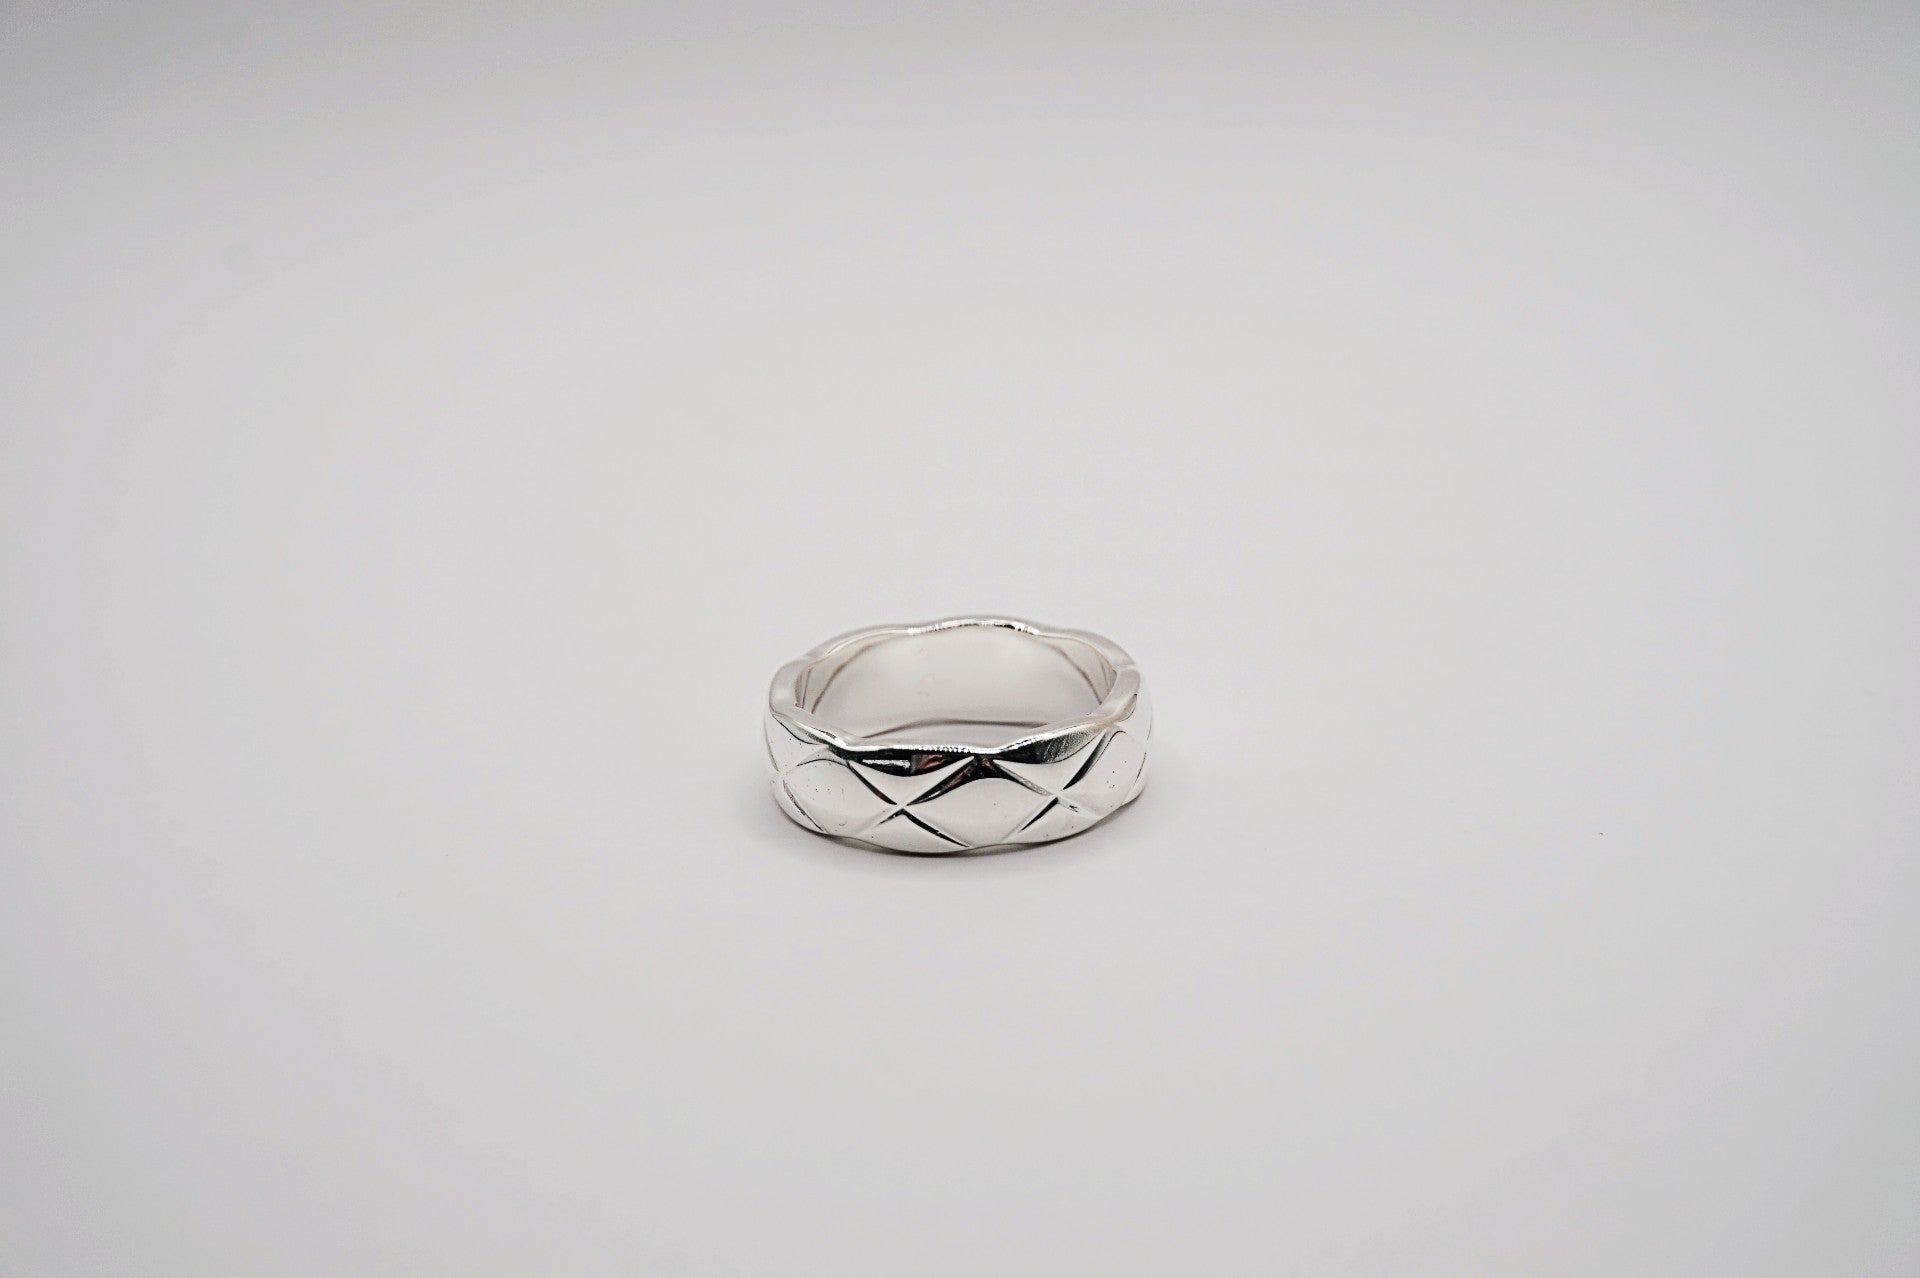 Chanel dupe ring. Korean jewelry trend. Third Tone Jewelry. Third Tone Rings. 